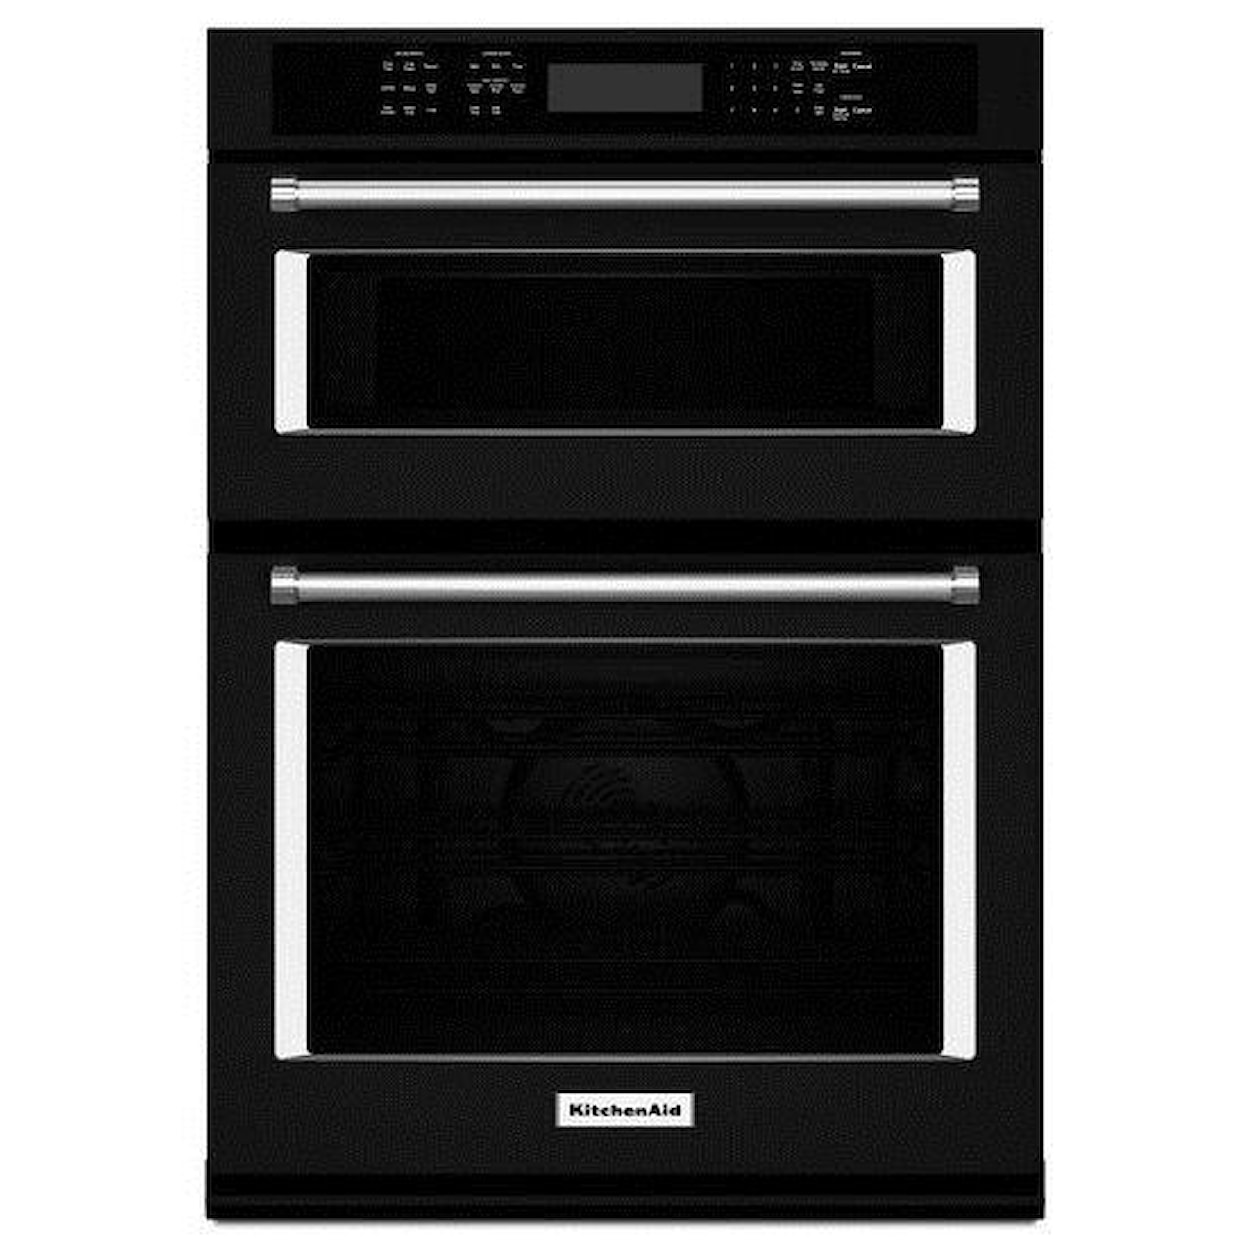 KitchenAid Combination Oven with Microwave 30" 5.0 Cu. Ft. Oven / Microwave Combo